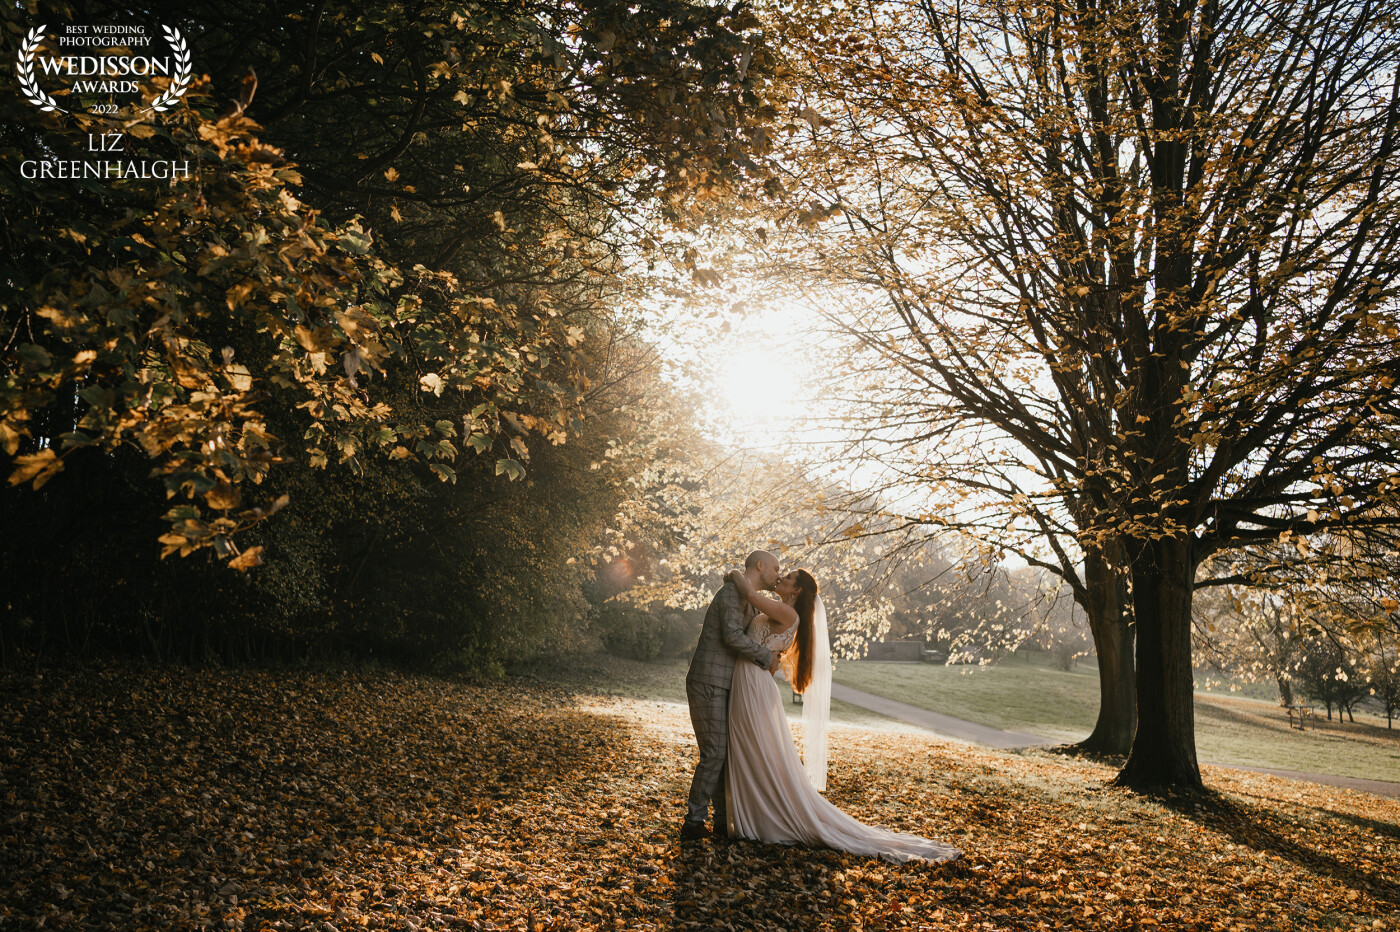 Late Autumn around Rutland Water, Ela & Craig celebrated their wedding day in beautiful light and surroundings. We made use of the afternoon light and and the wonderful colours